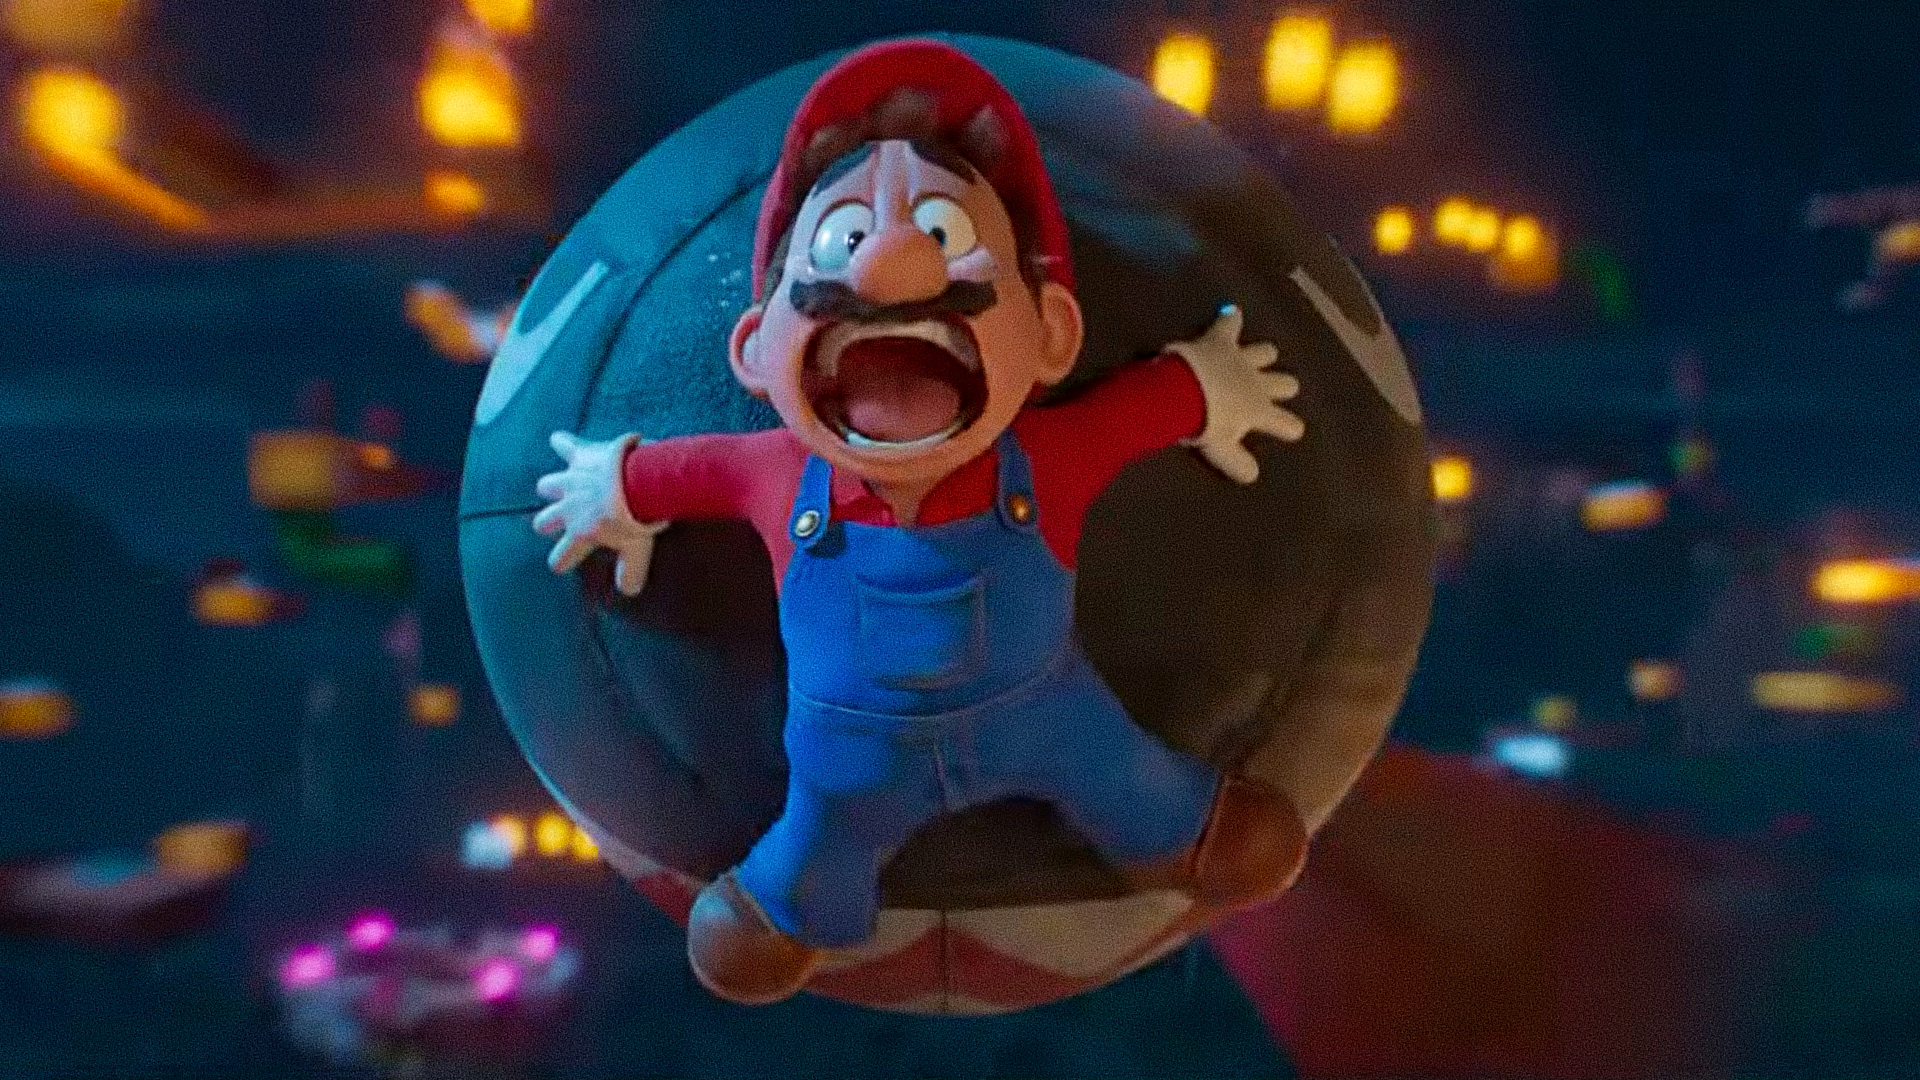 The Super Mario Bros. Movie gets US Netflix streaming date